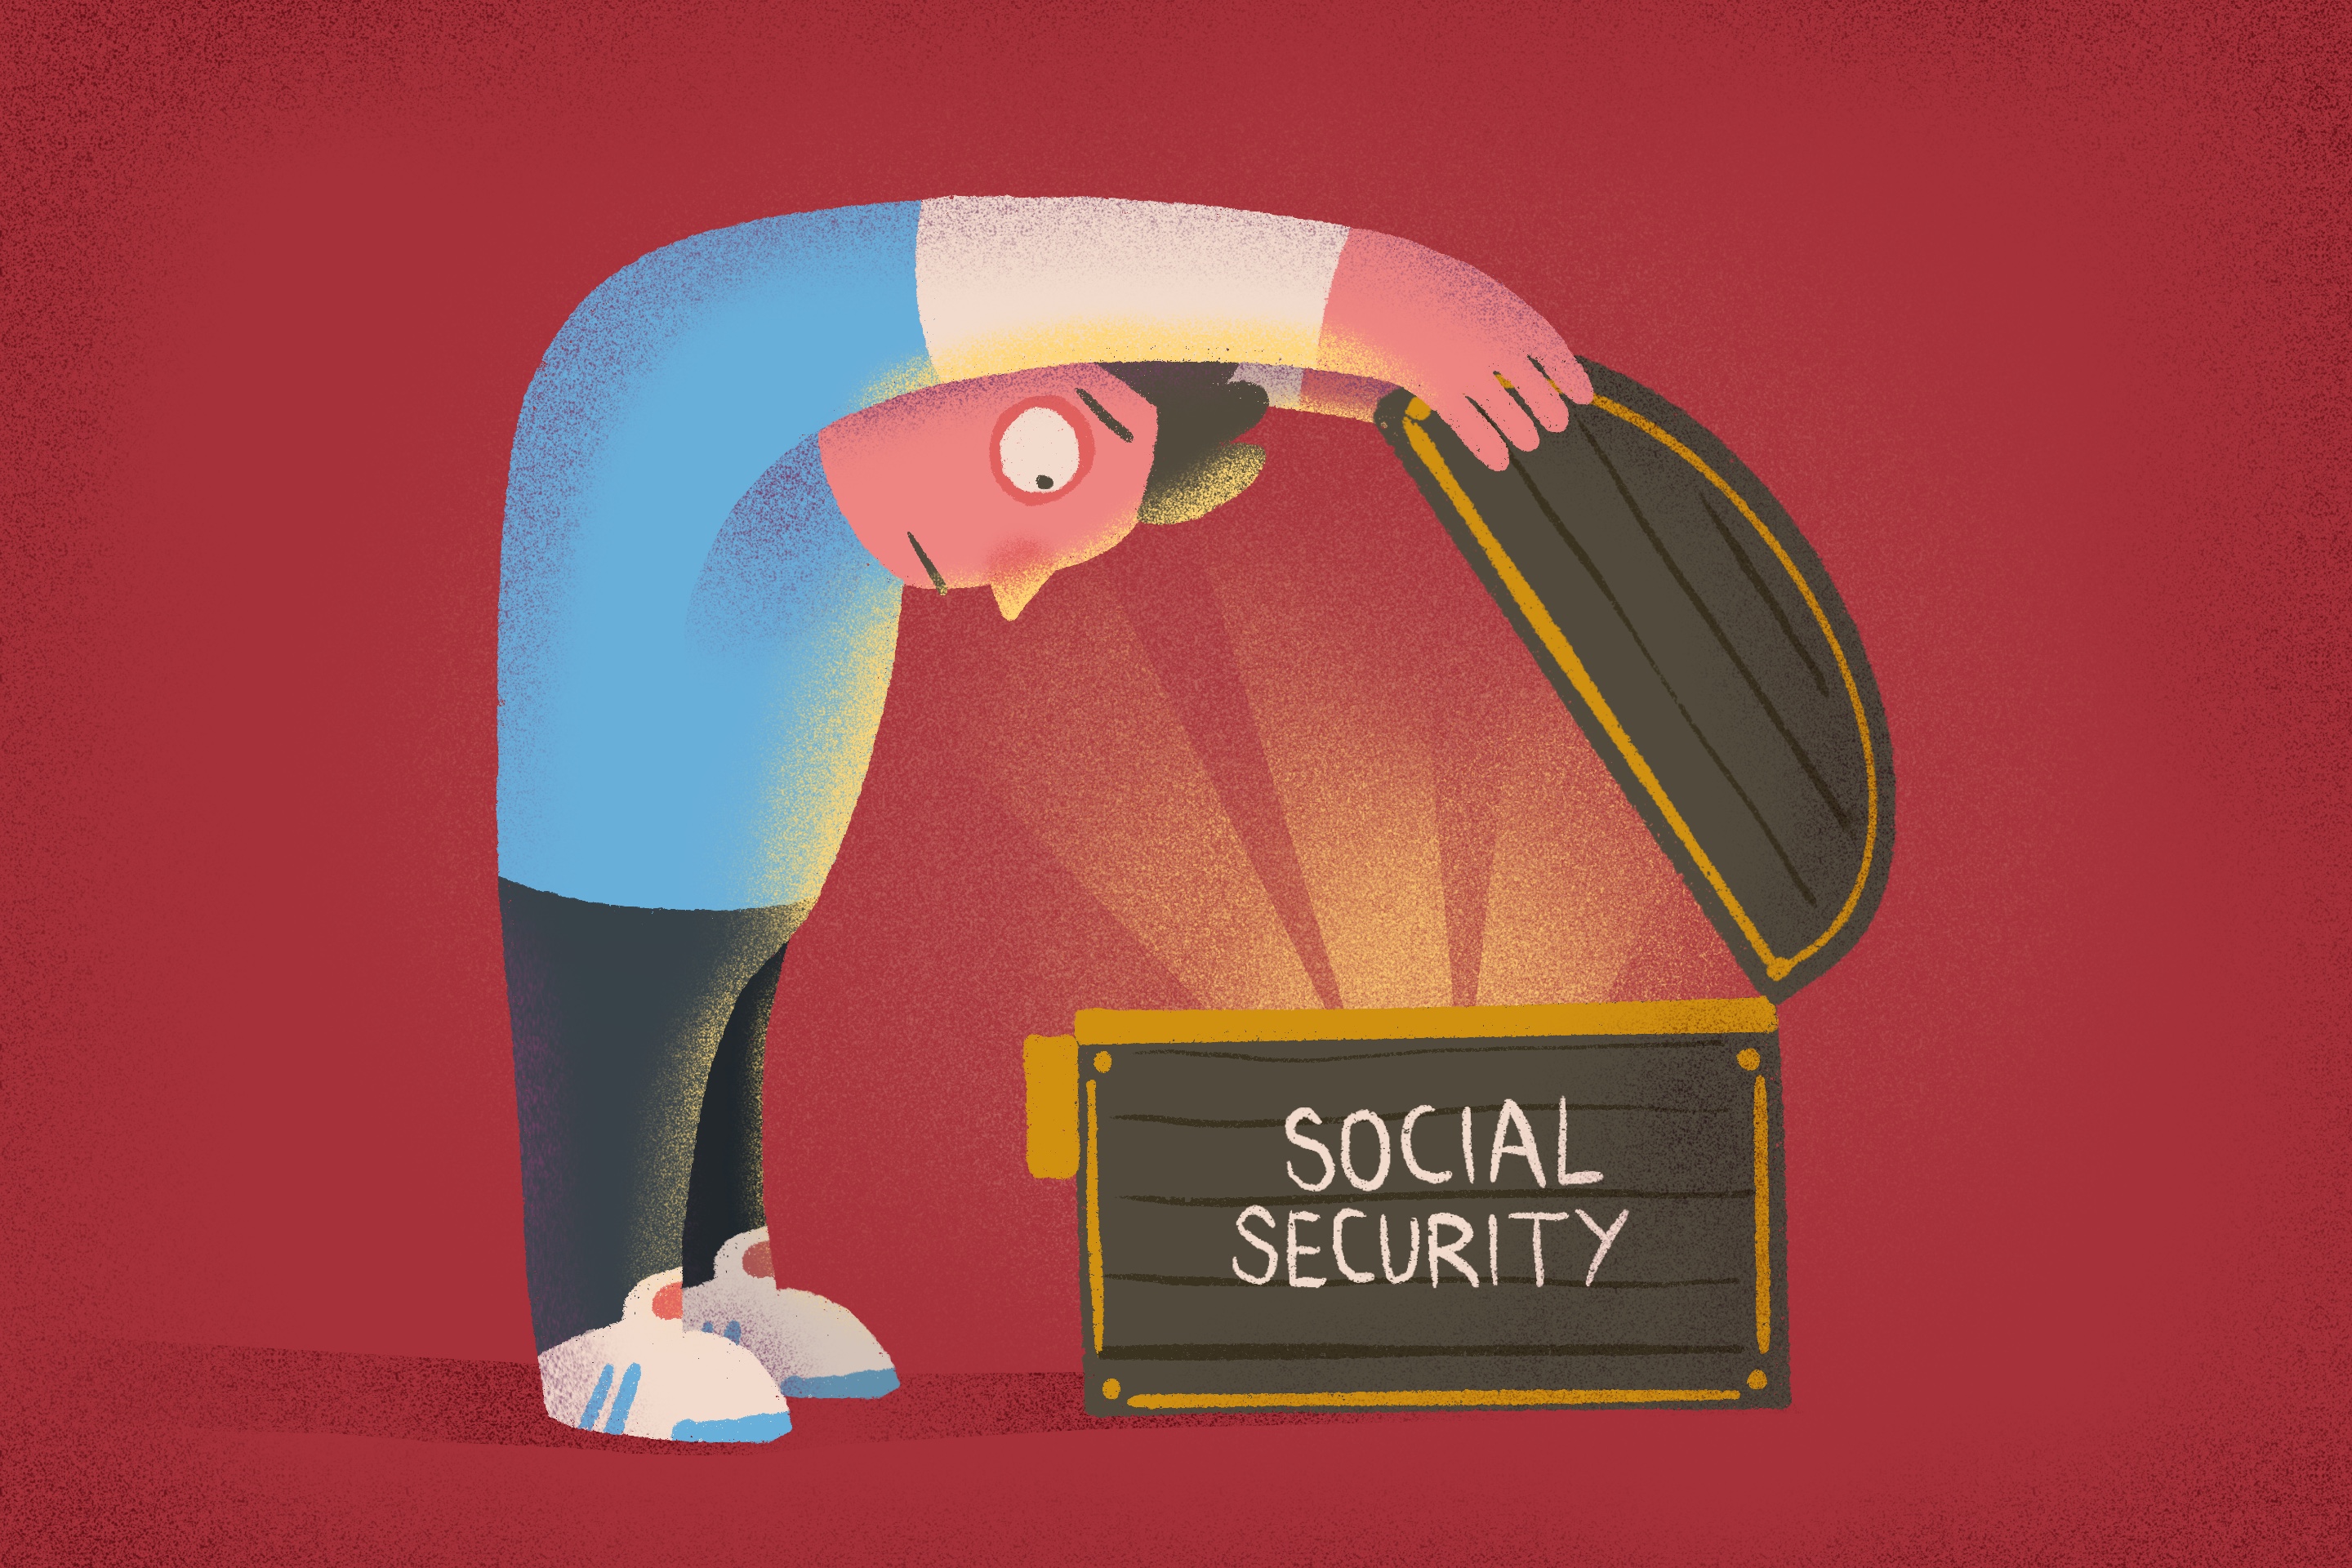 What Will Social Security Look Like When Millennials Retire?